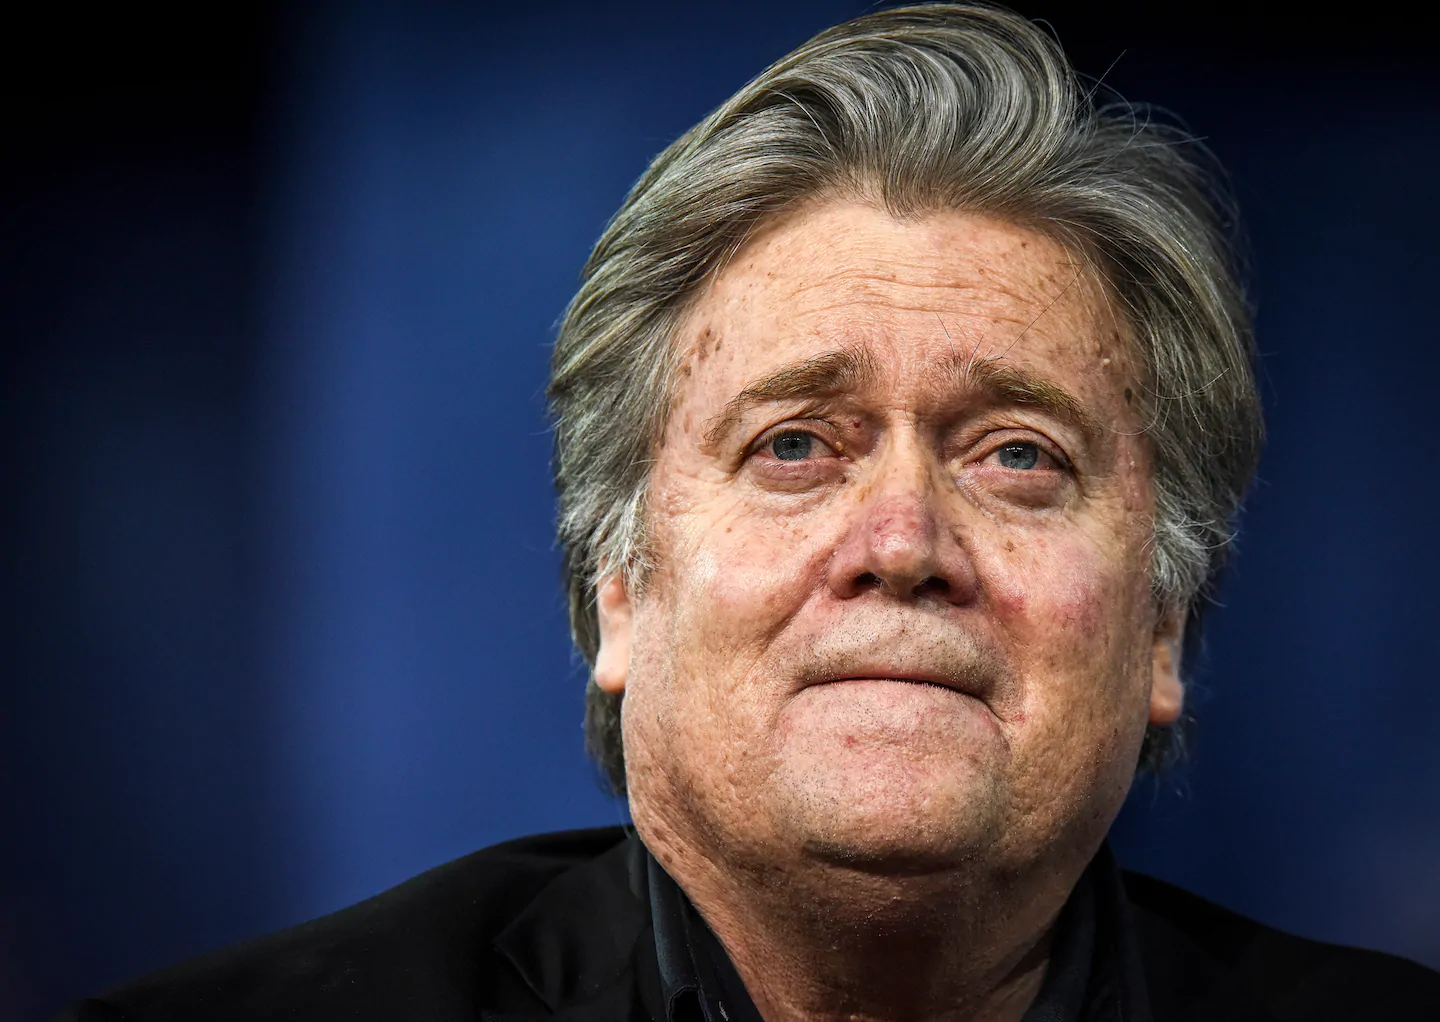  Twitter bans Steve Bannon for video suggesting violence against Fauci, FBI Director Wray